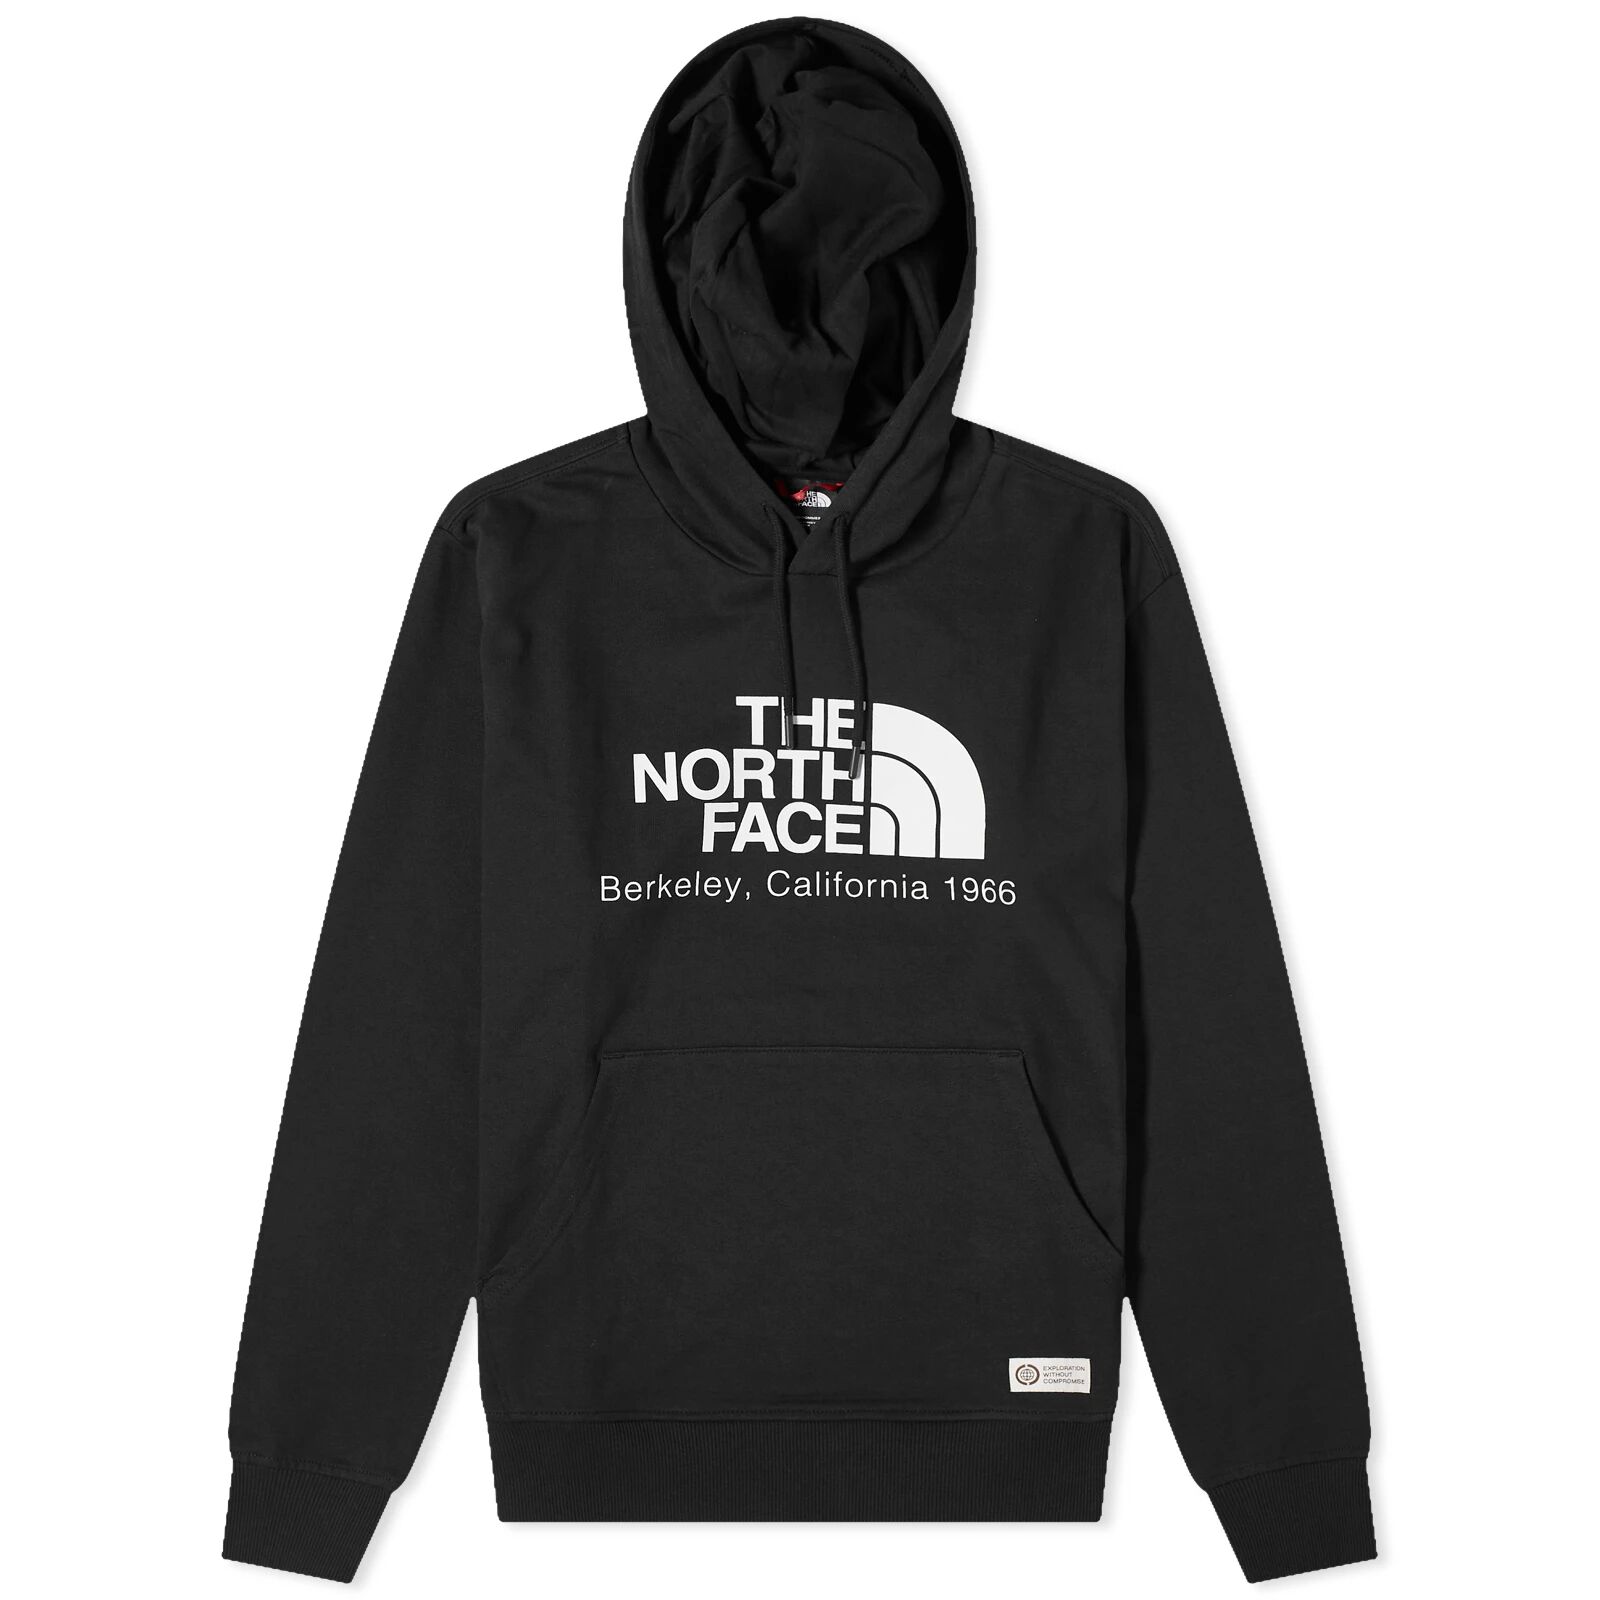 The North Face Men's Berkeley California Hoody in Black, Size Small